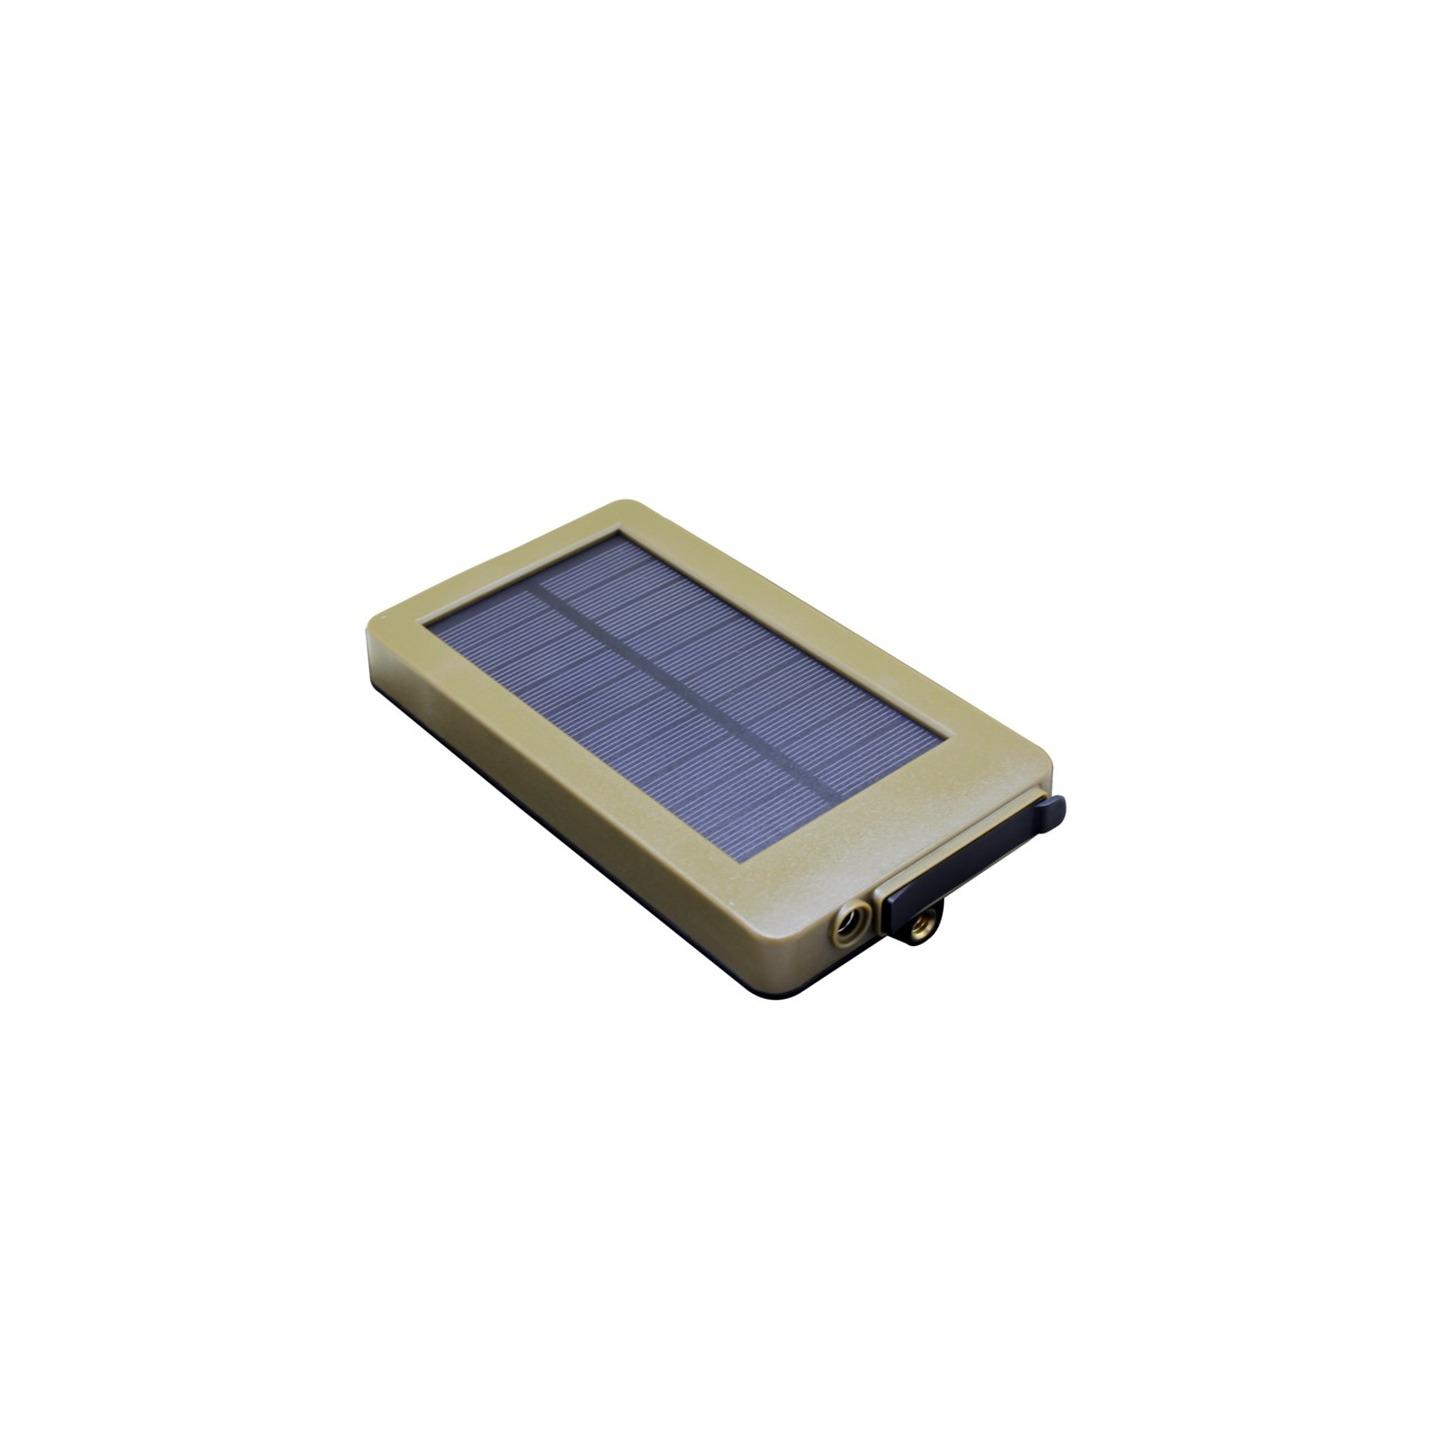 12V Solar Panel to Suit Outdoor Trail Cameras QC8067